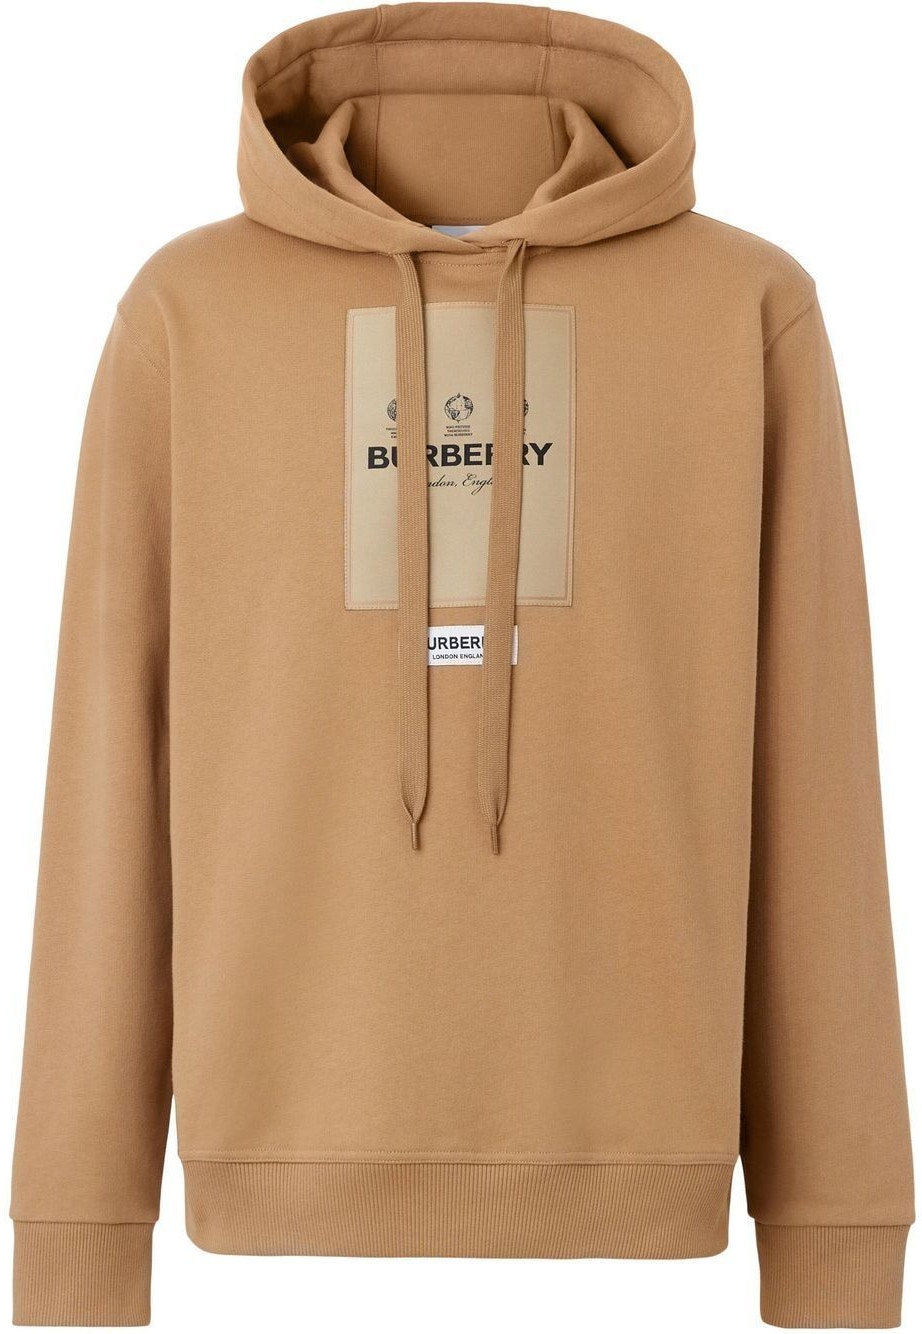 A1420 BURBERRY OWIE